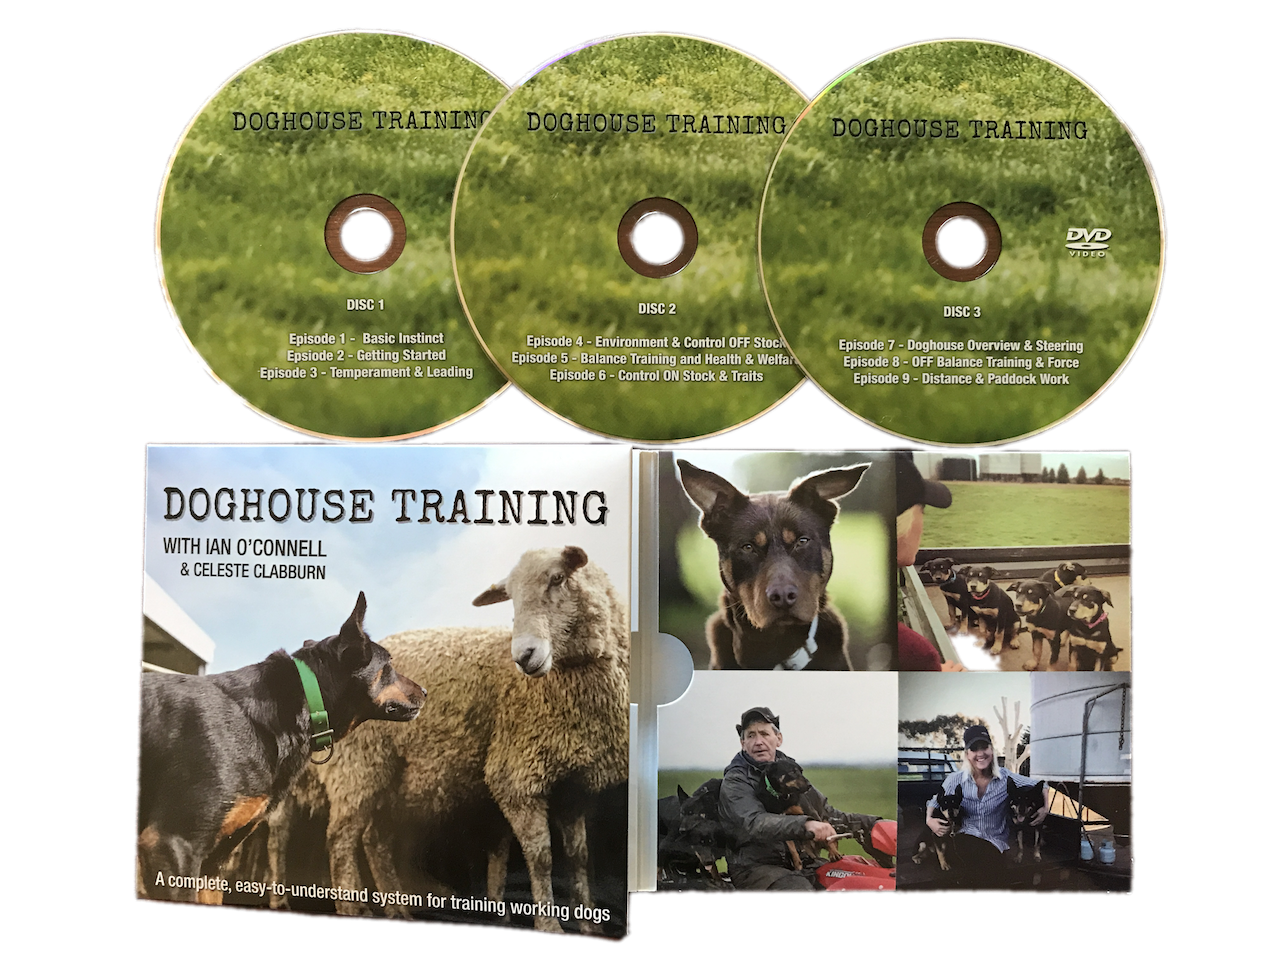 Dog House Training - Complete DVD Series